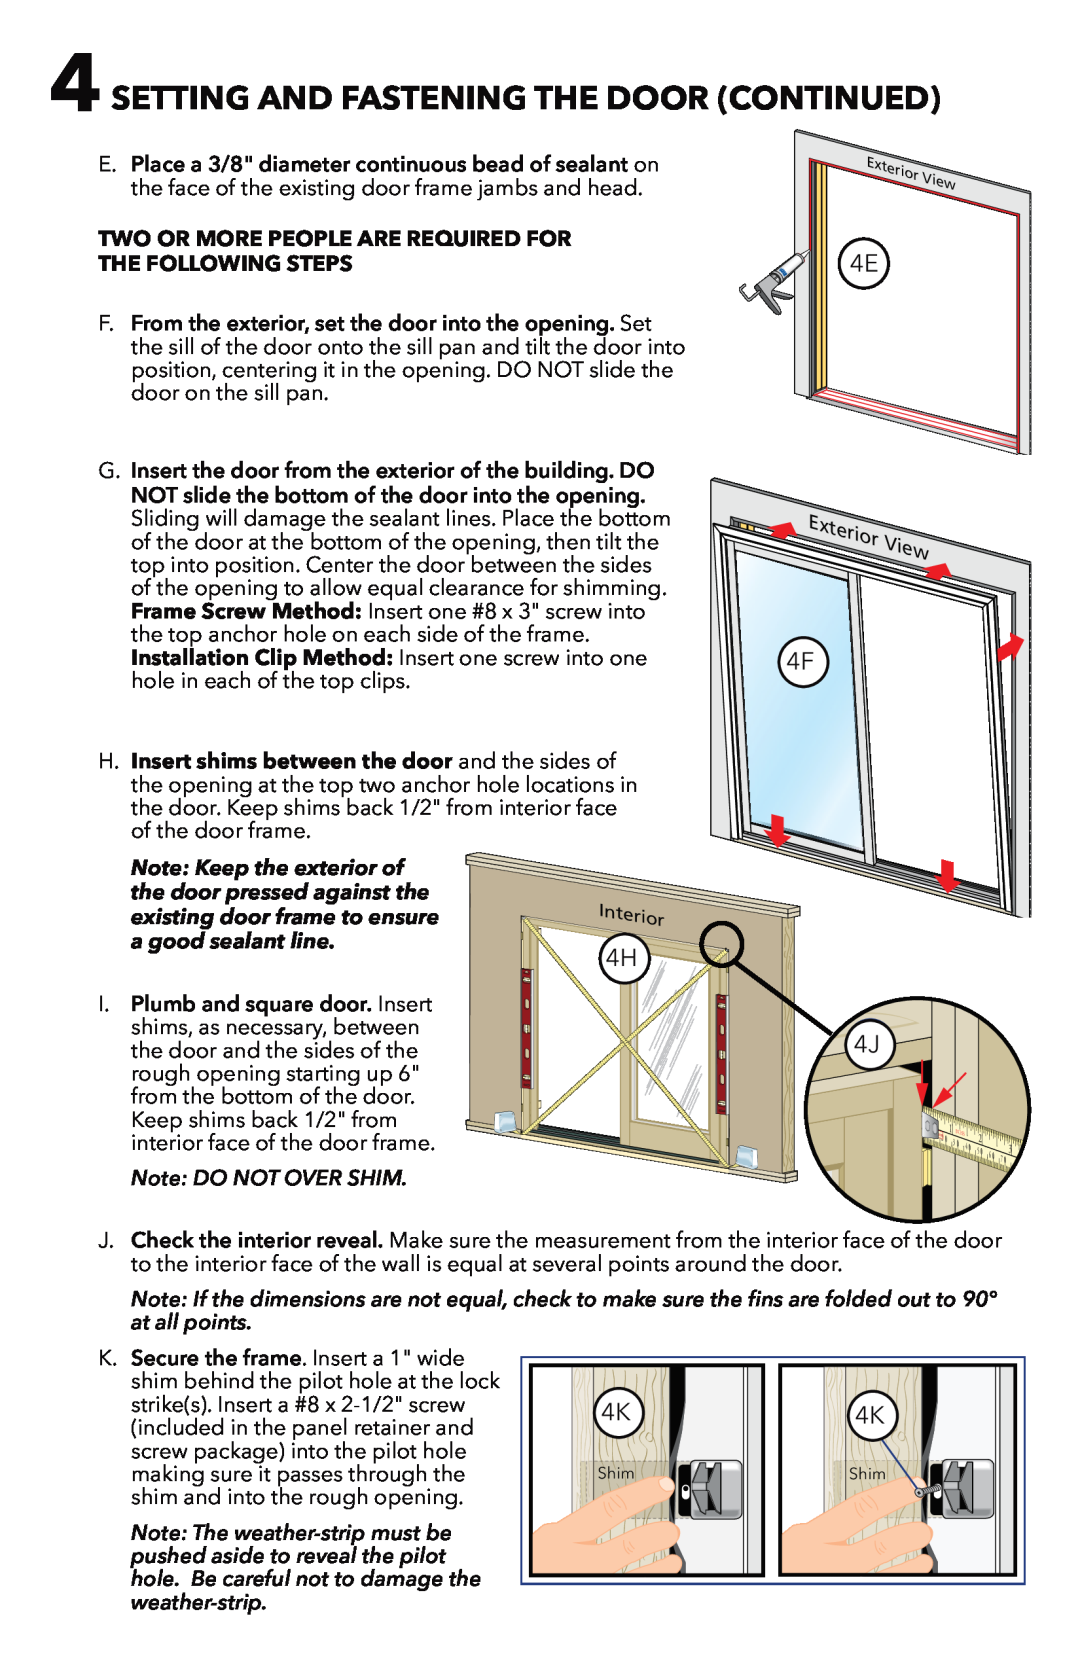 Pella 81CM0100 Setting And Fastening The Door Continued, Exterior View, Note Keep the exterior of, a good sealant line 